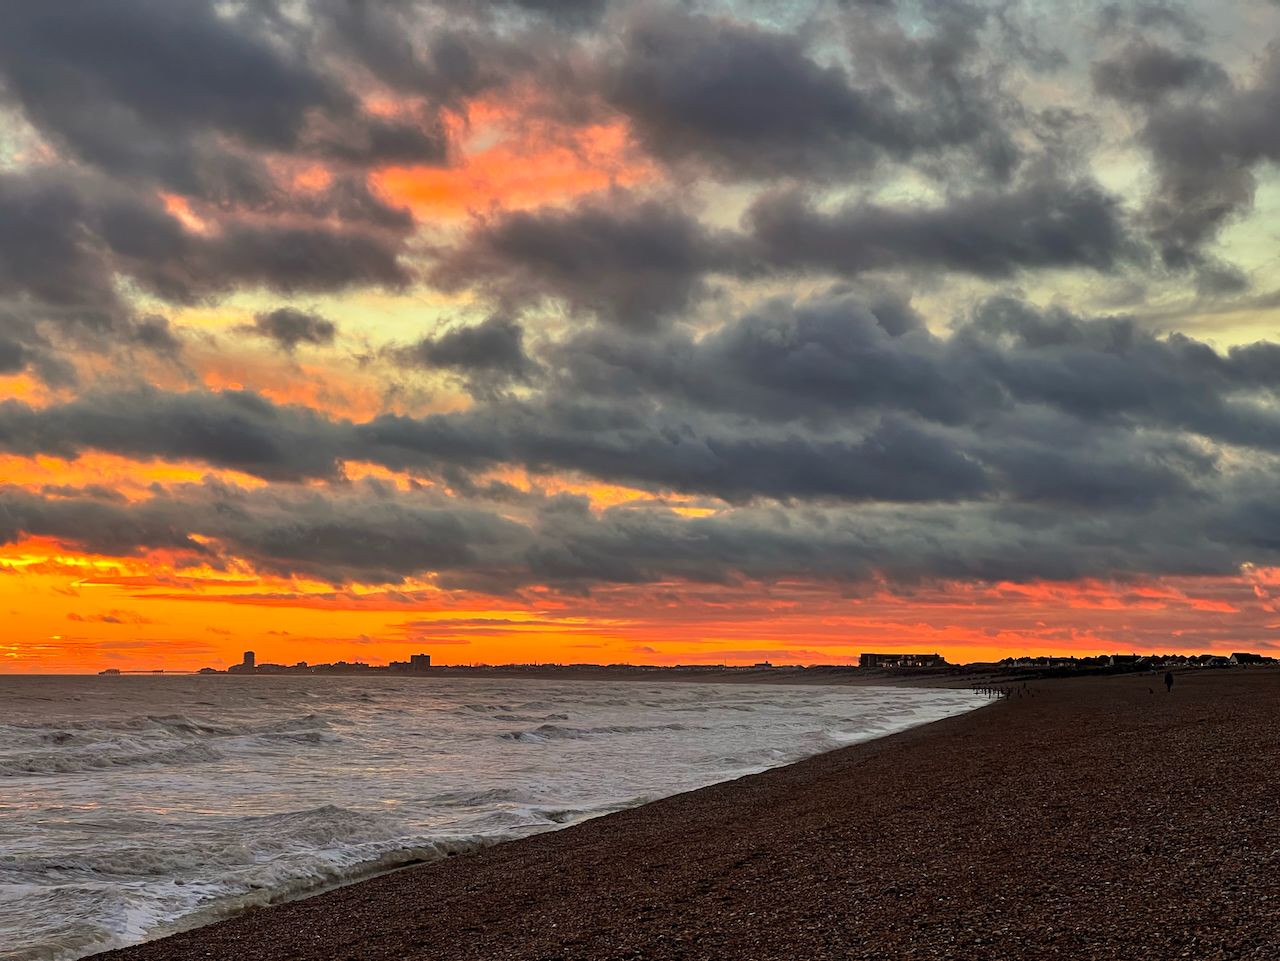 A stormy sunset over Shoreham Beach, looking west to Worthing pier.